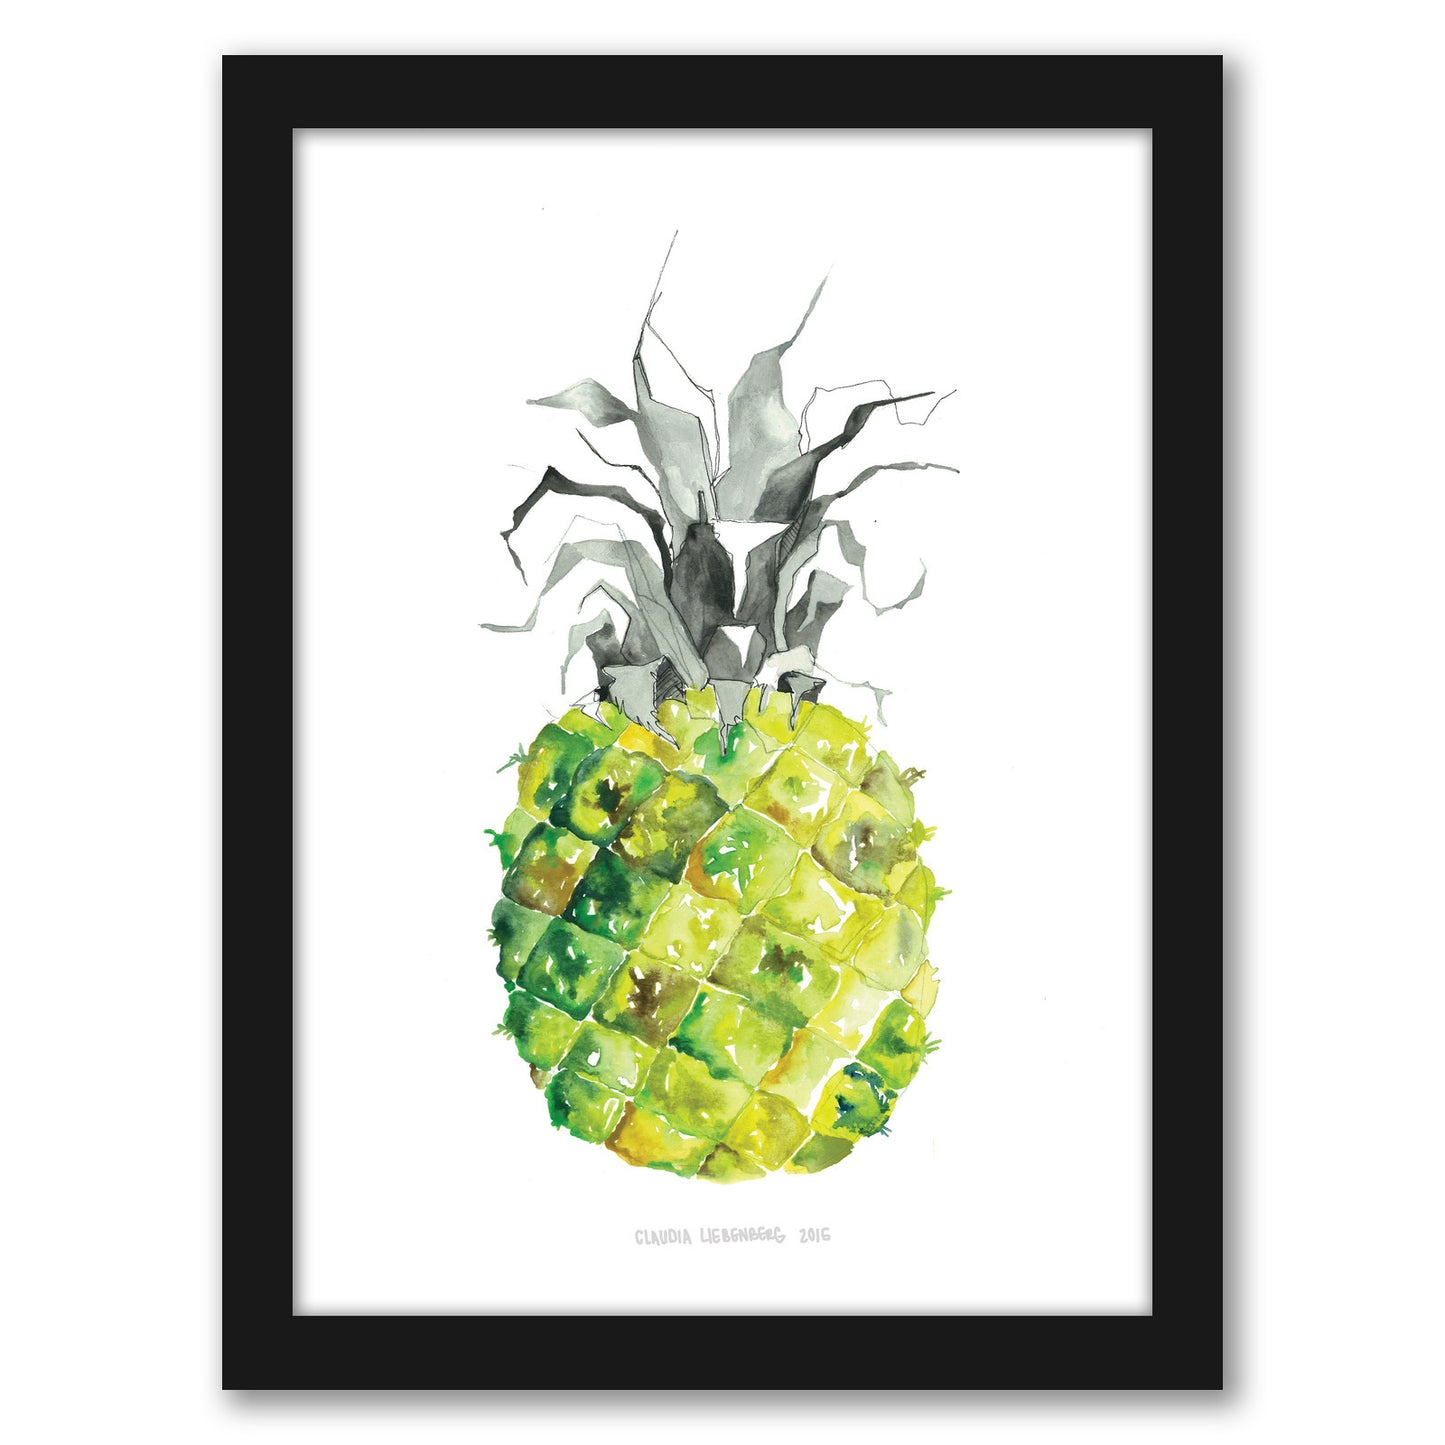 Pineapple Yellow by Claudia Liebenberg - Framed Print